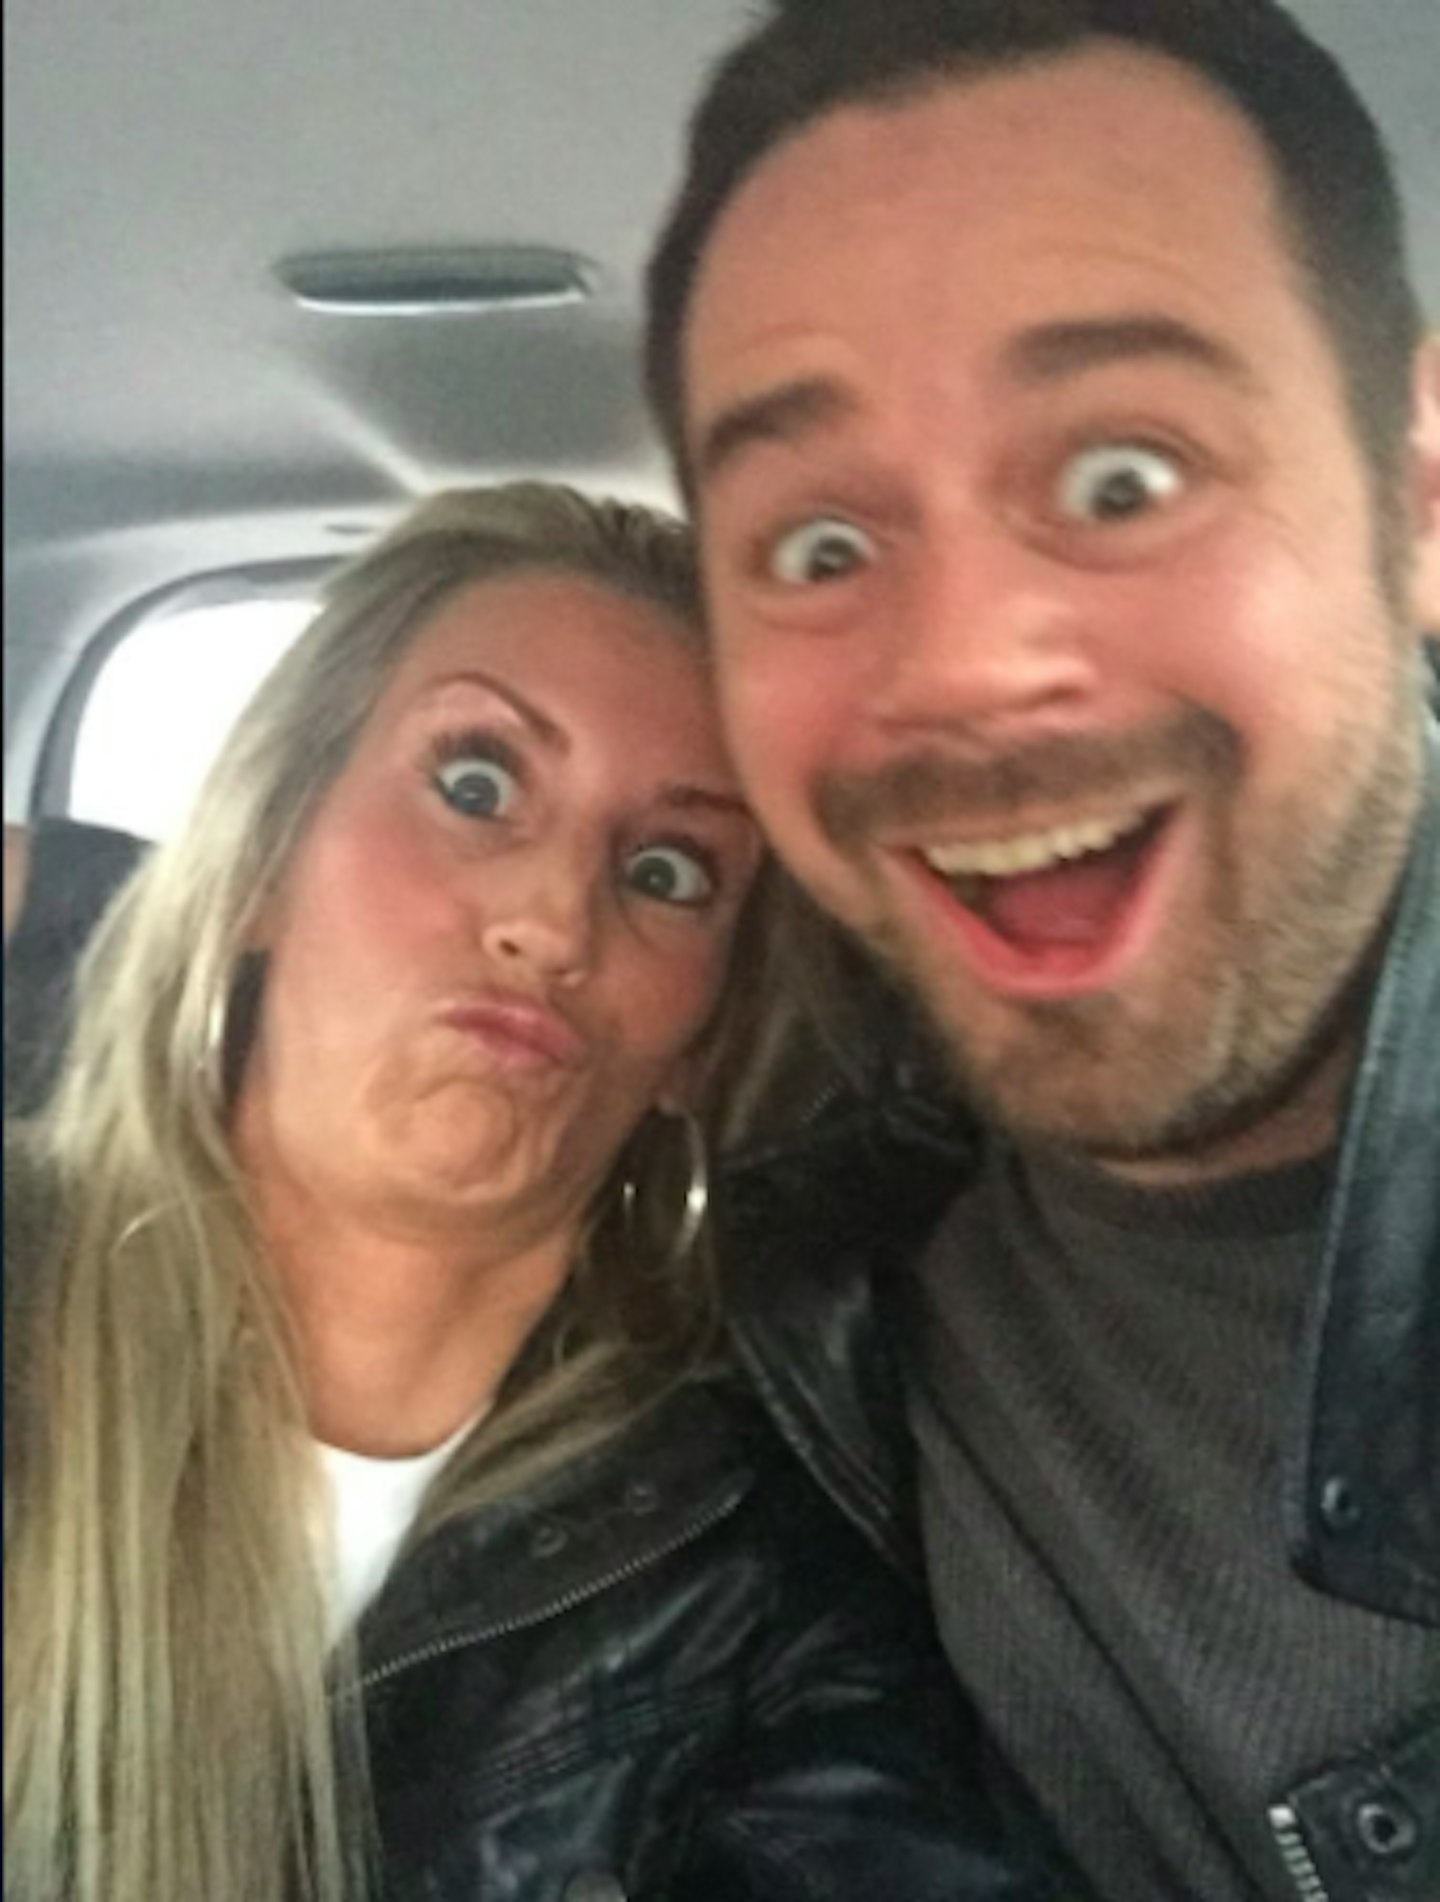 Danny Dyer and wife Joanne Mas